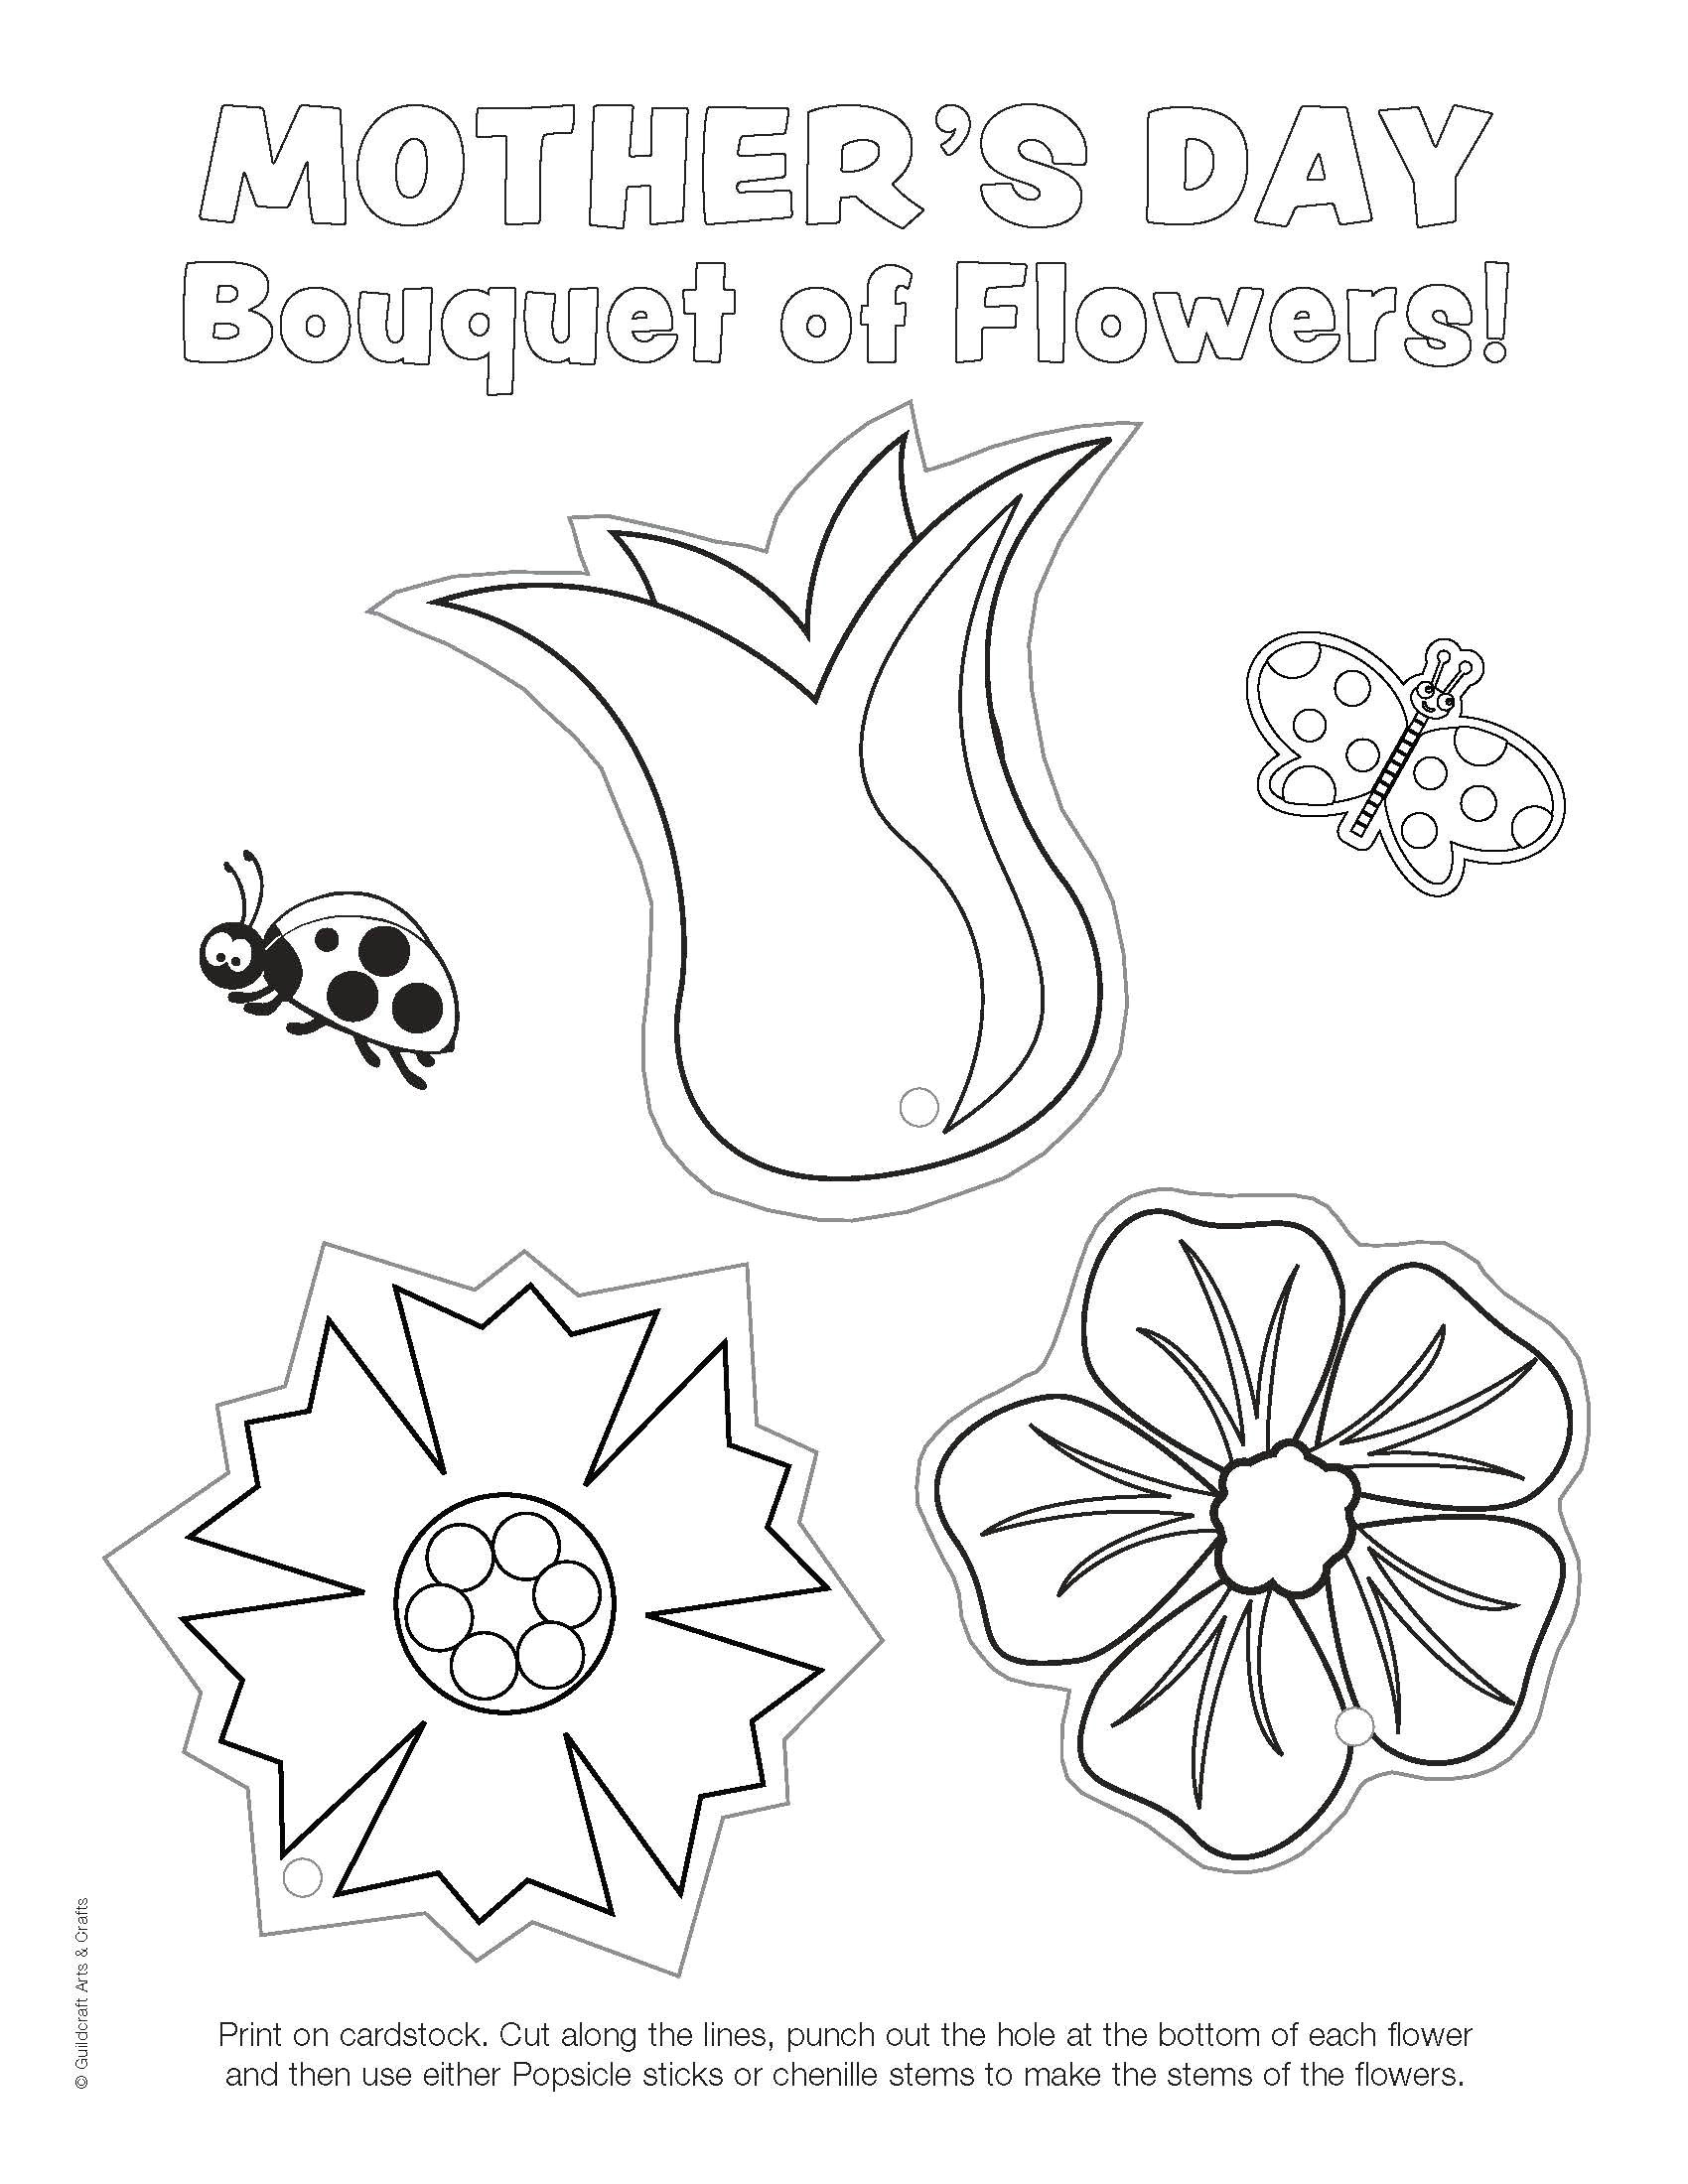 Drawing Flowers for Mother S Day Ready to Color Mother S Day Flowers Printable Printables